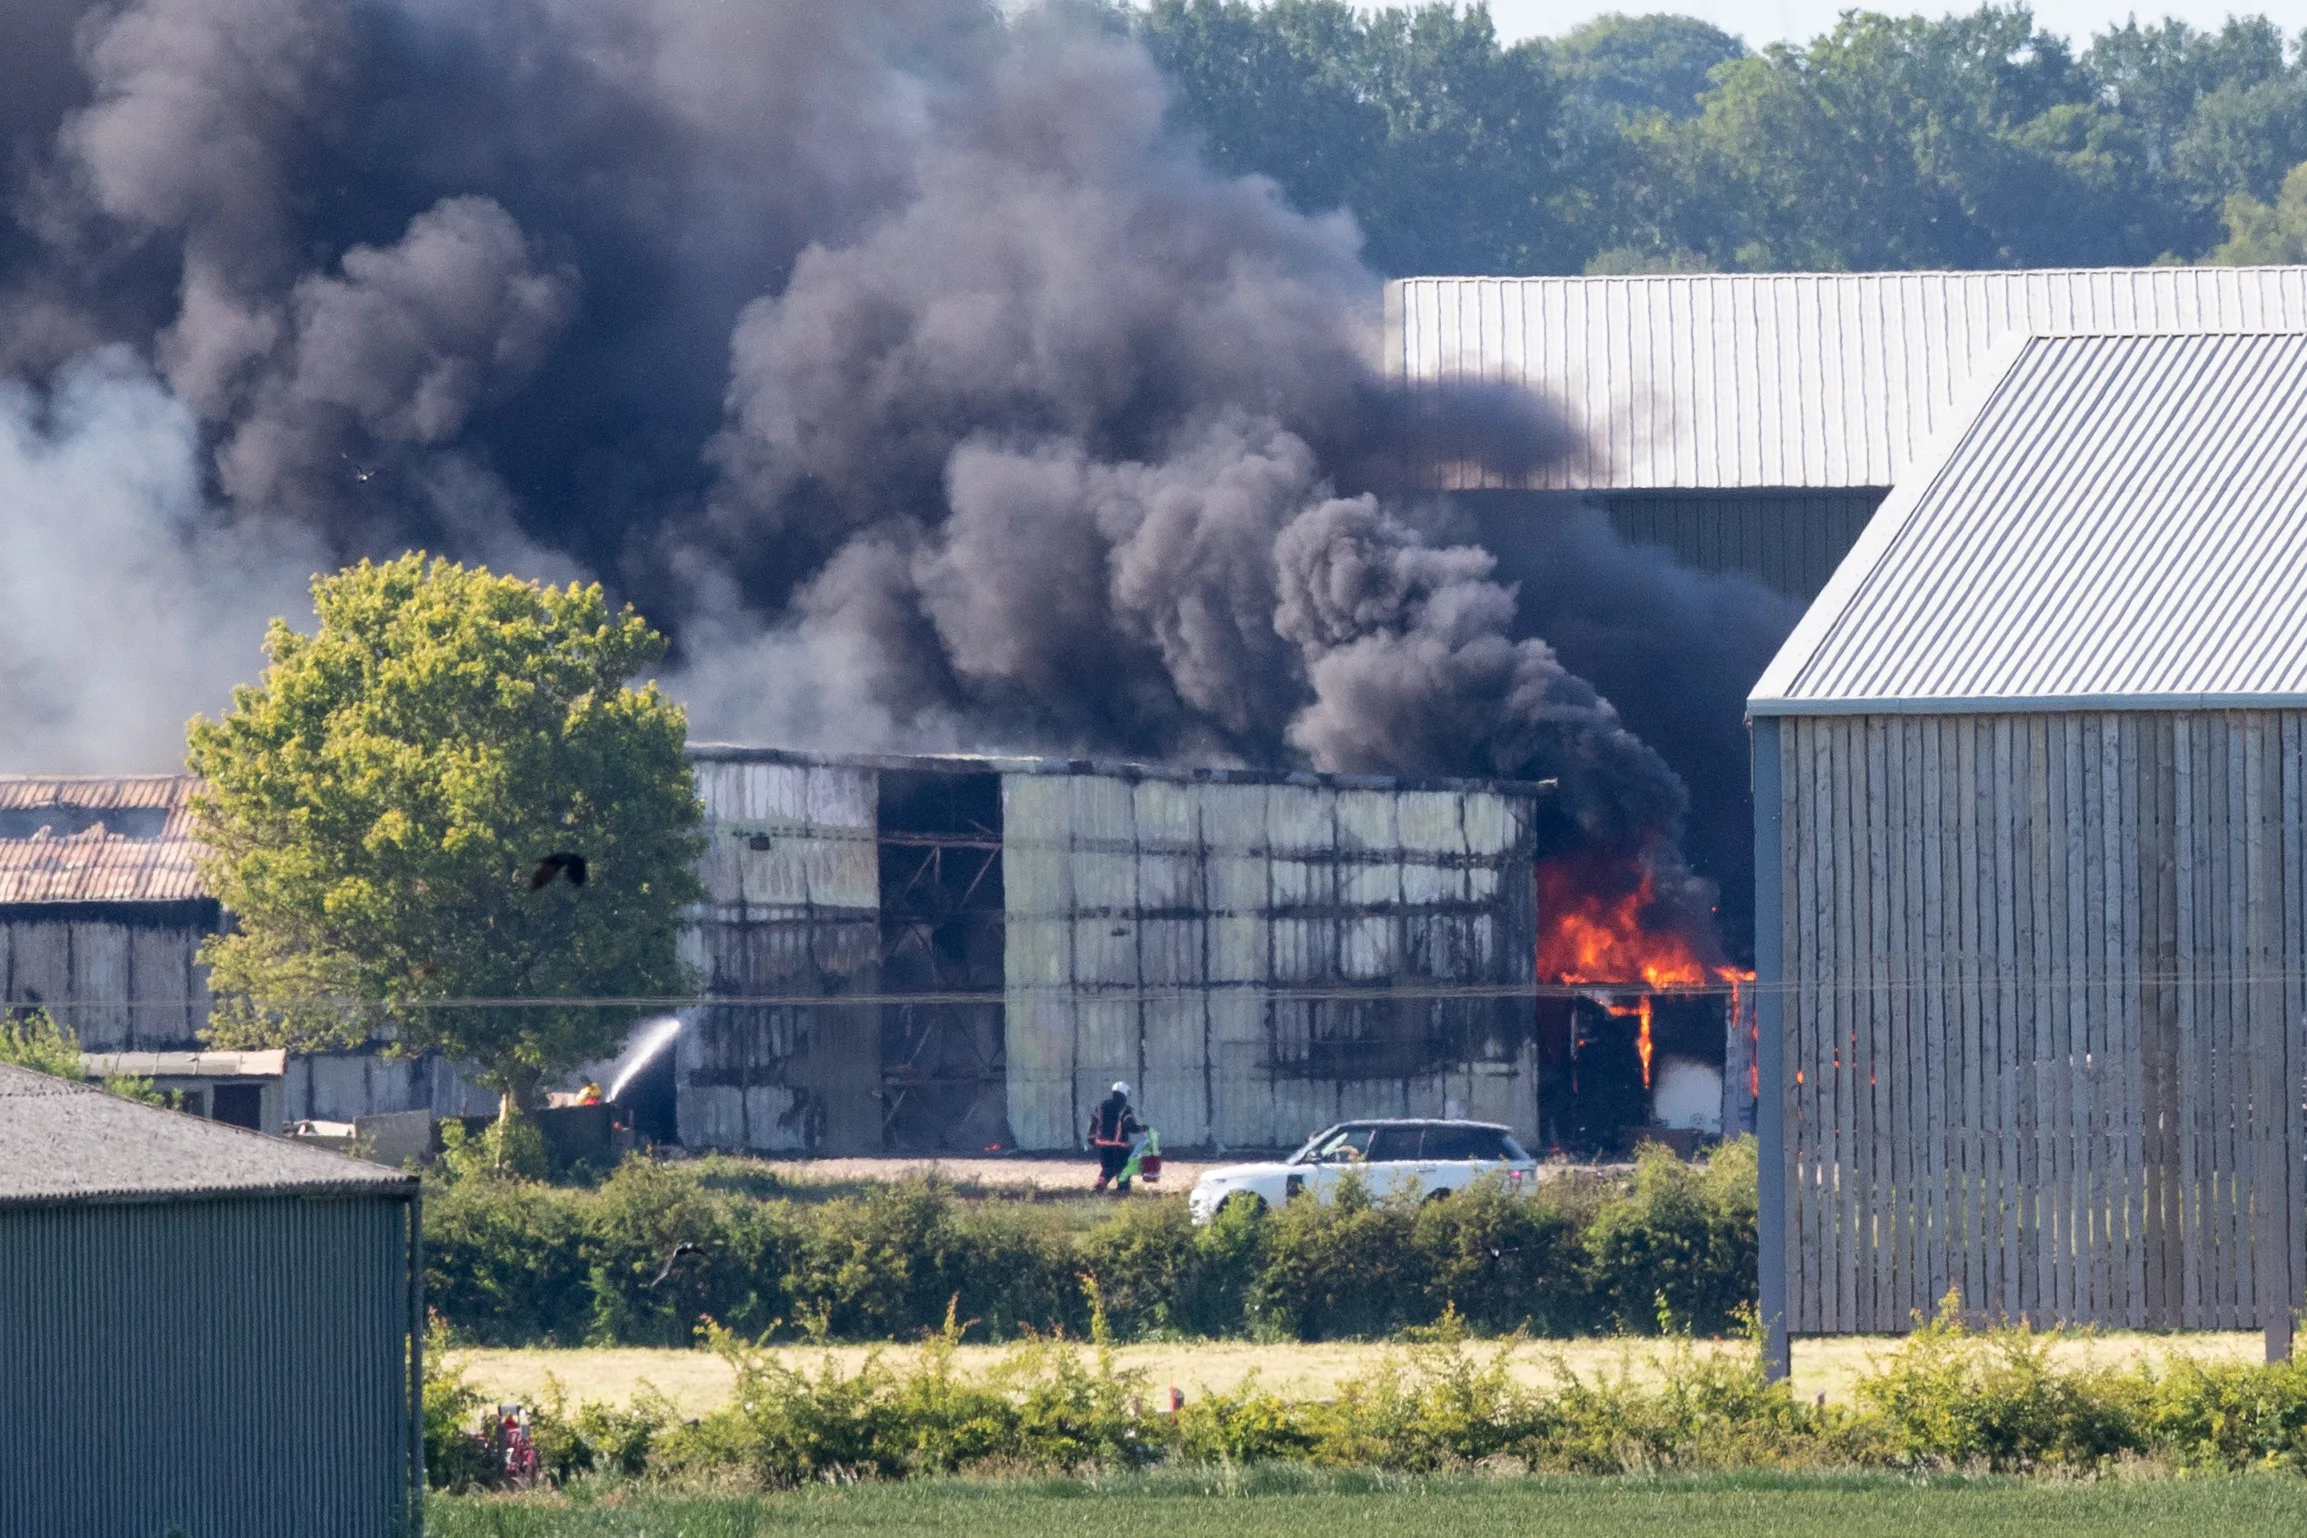 The fire at Corkers Crisp factory near Ely, Cambridgeshire. The smoke could be seen up to 50 miles away in Bedfordshire. PHOTO: Geoff Robinson